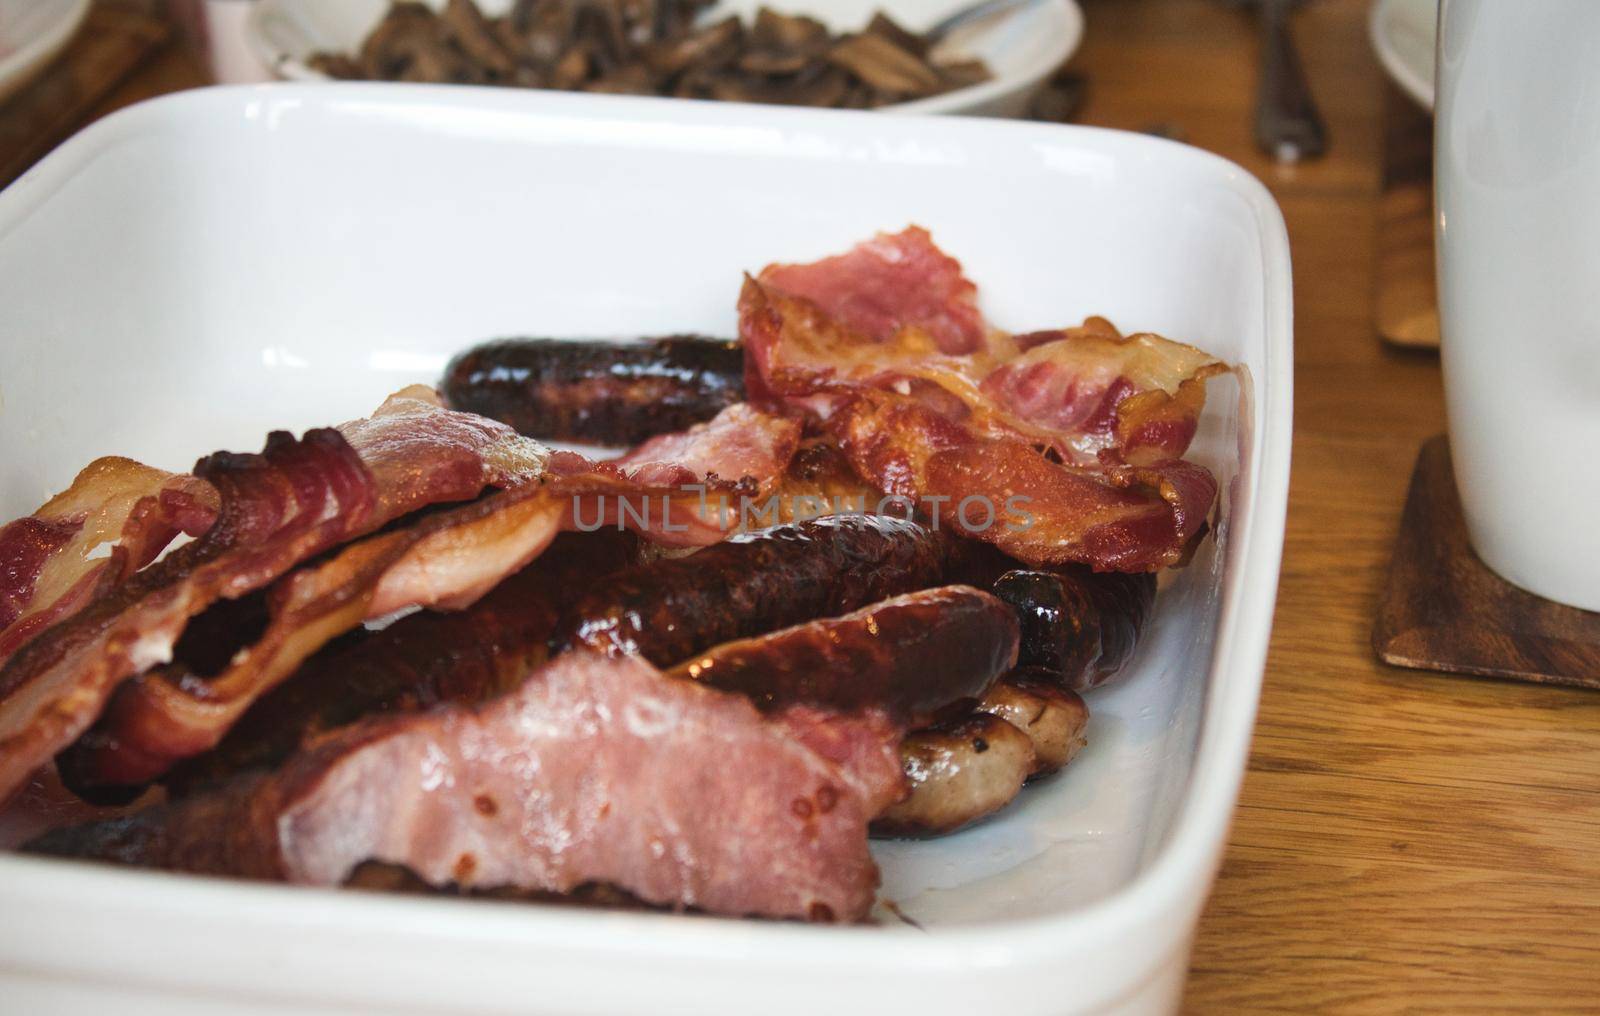 Greasy fried bacon and sausages on a white ceramic plate - typical English breakfast by tennesseewitney